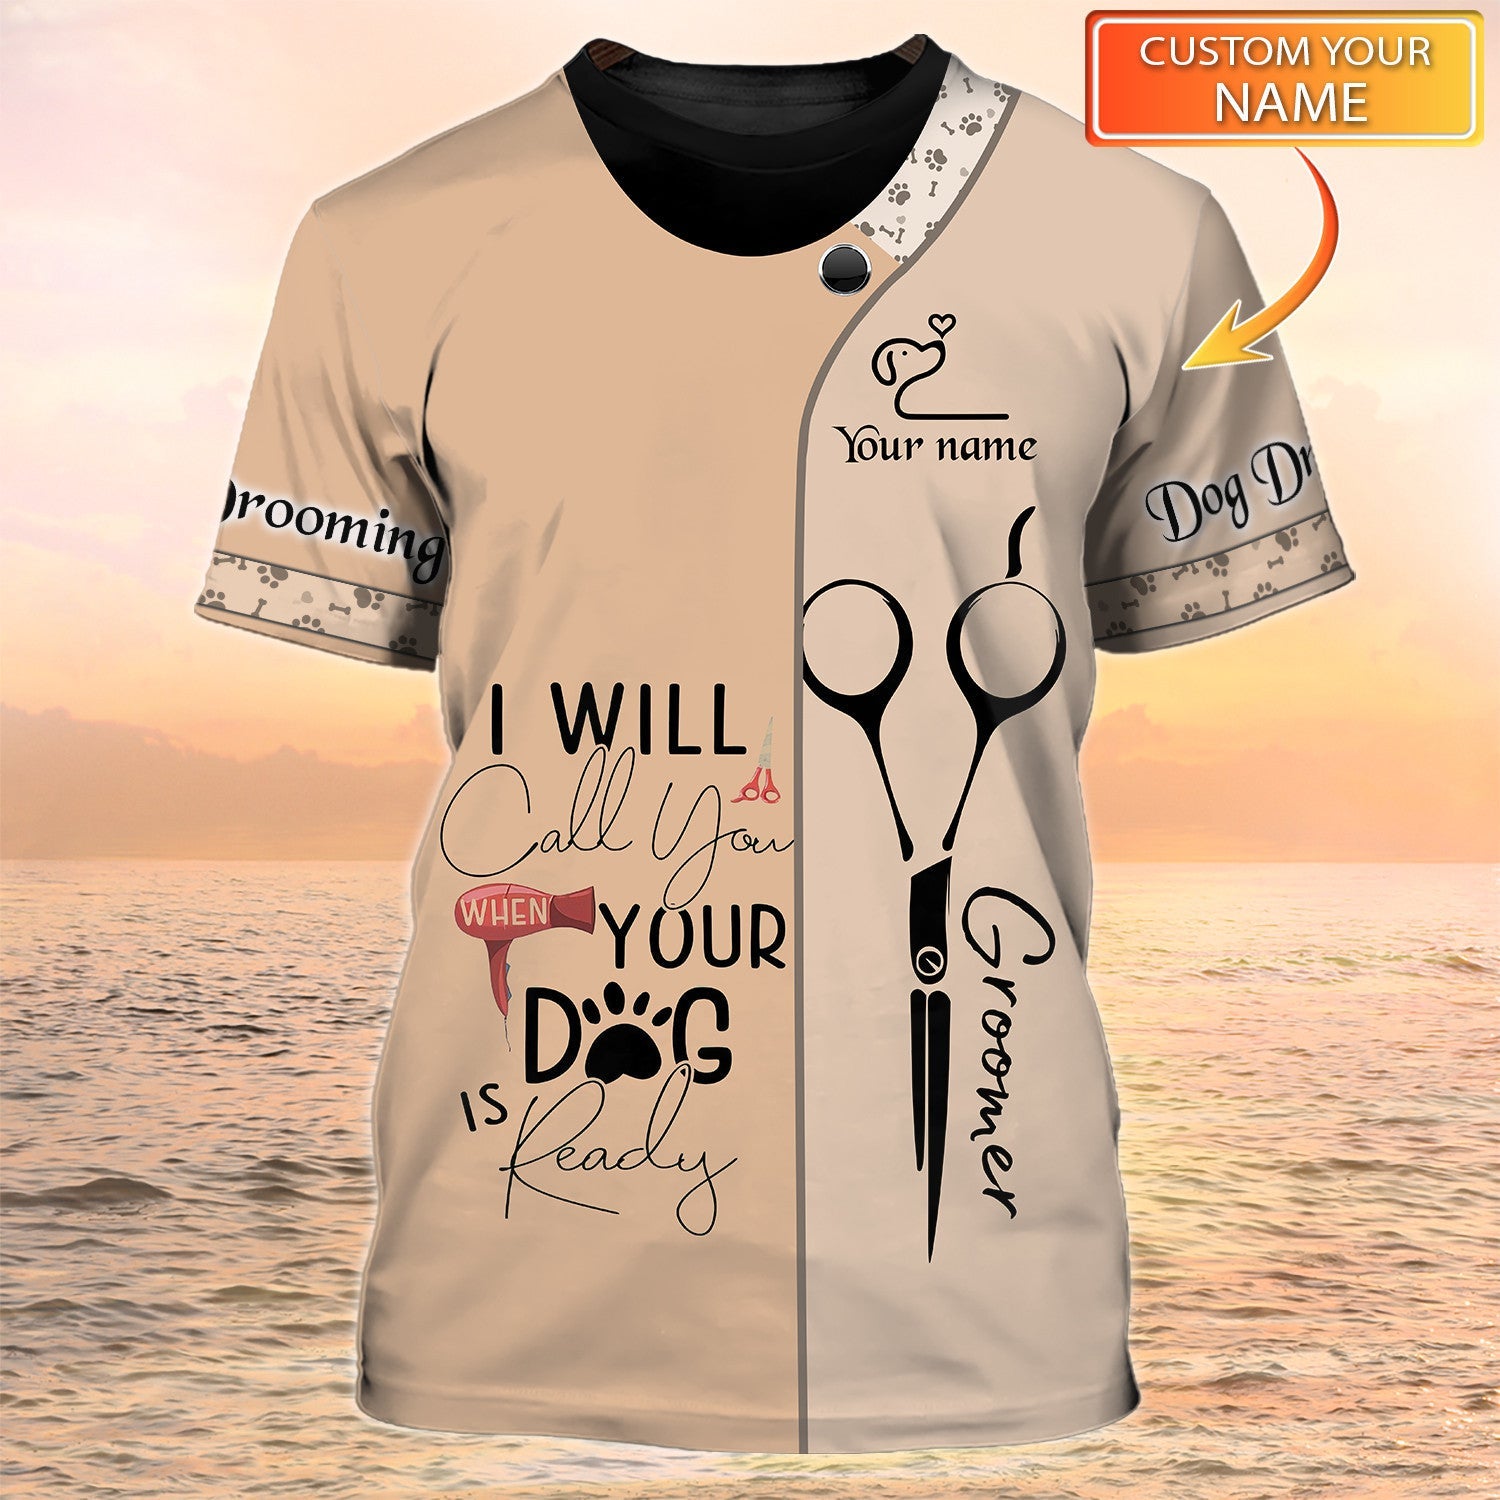 Dog Groomer Shirt Pets Grooming Uniform I Will Call You When Your Dog Is Ready